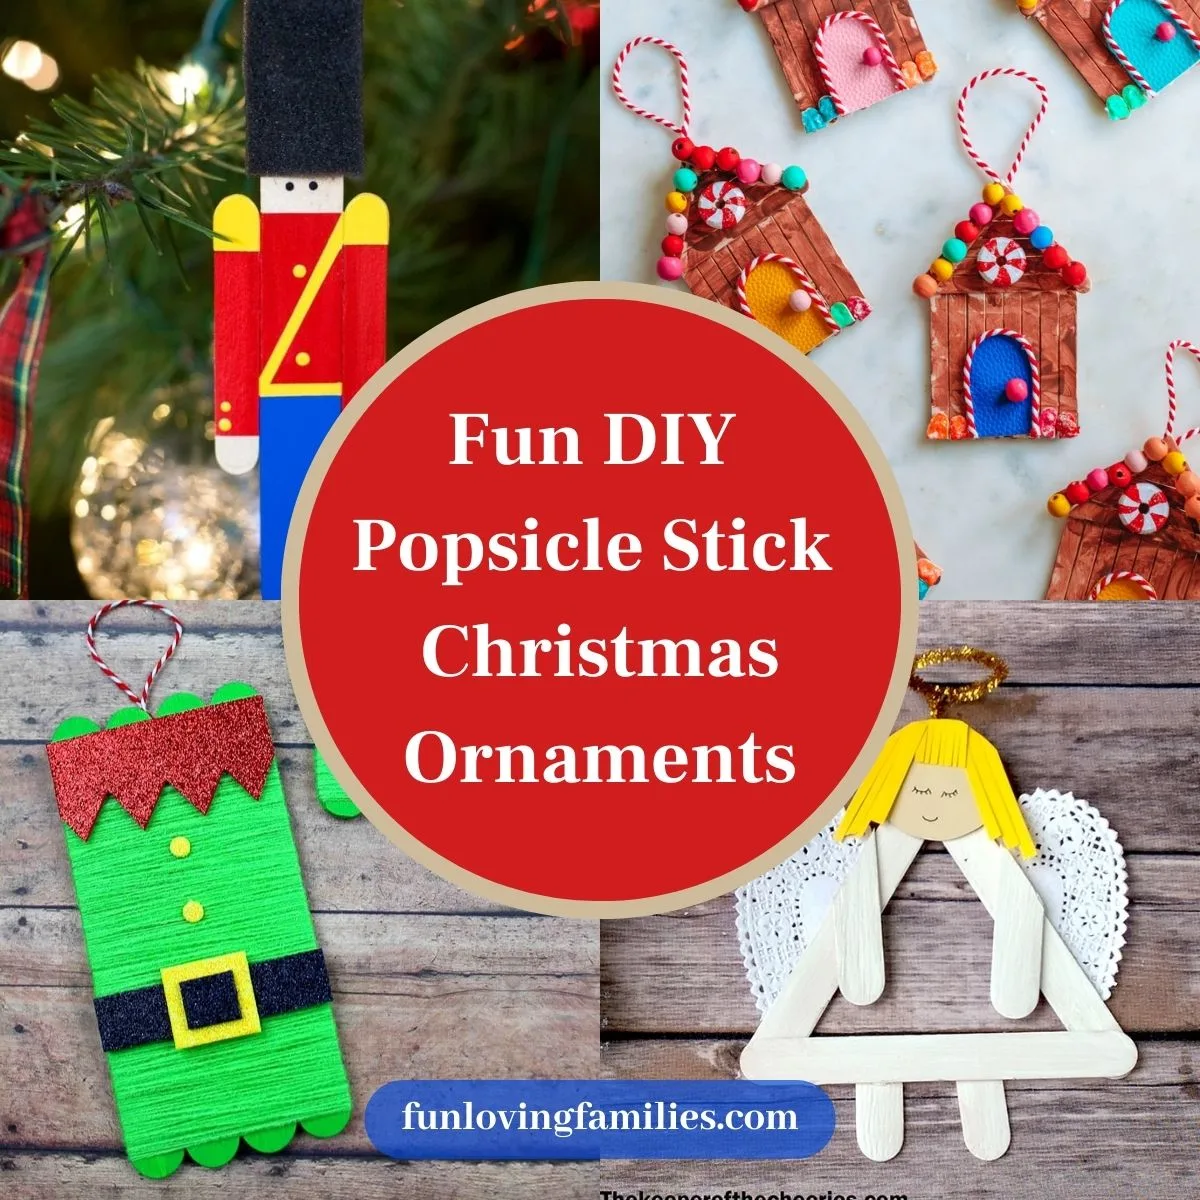 DIY Christmas Crafts with Popsicle Sticks